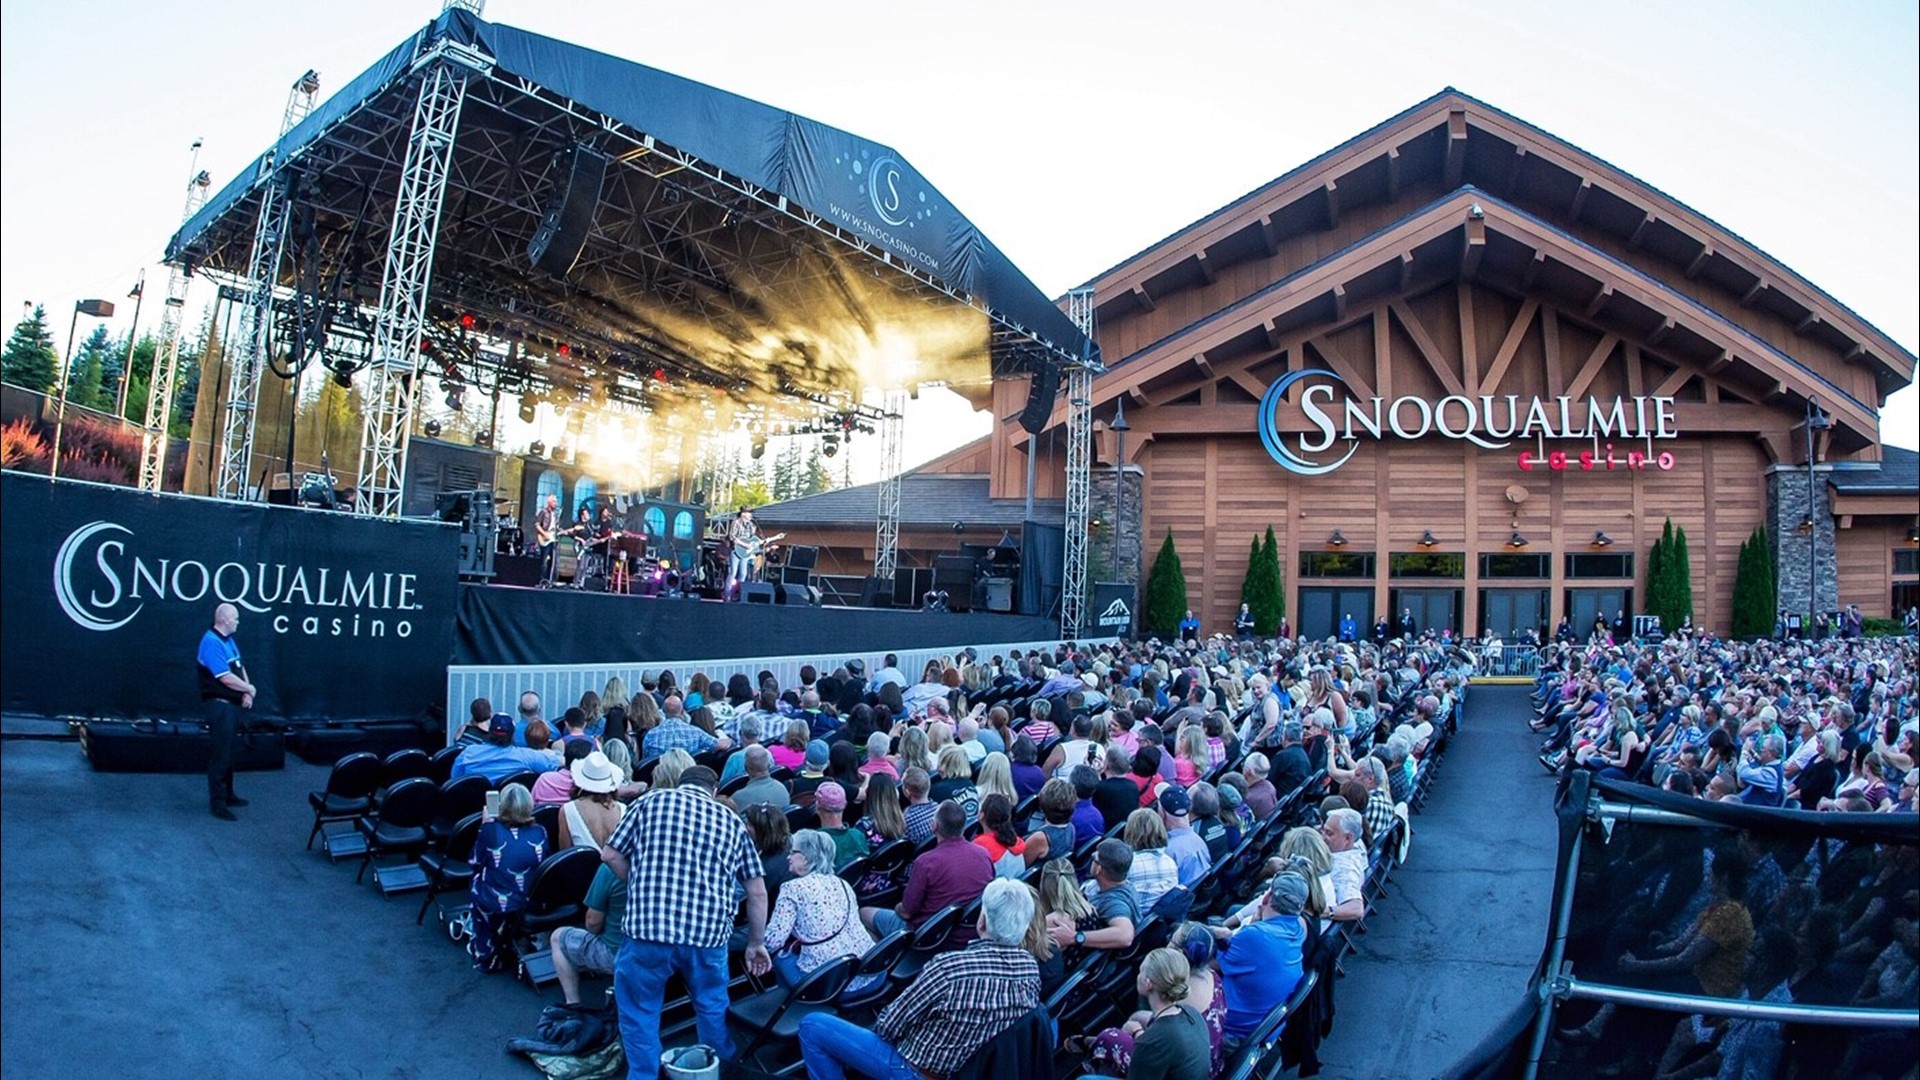 The Snoqualmie Casino's summer concert series kicks off next week! Sponsored by Snoqualmie Casino.